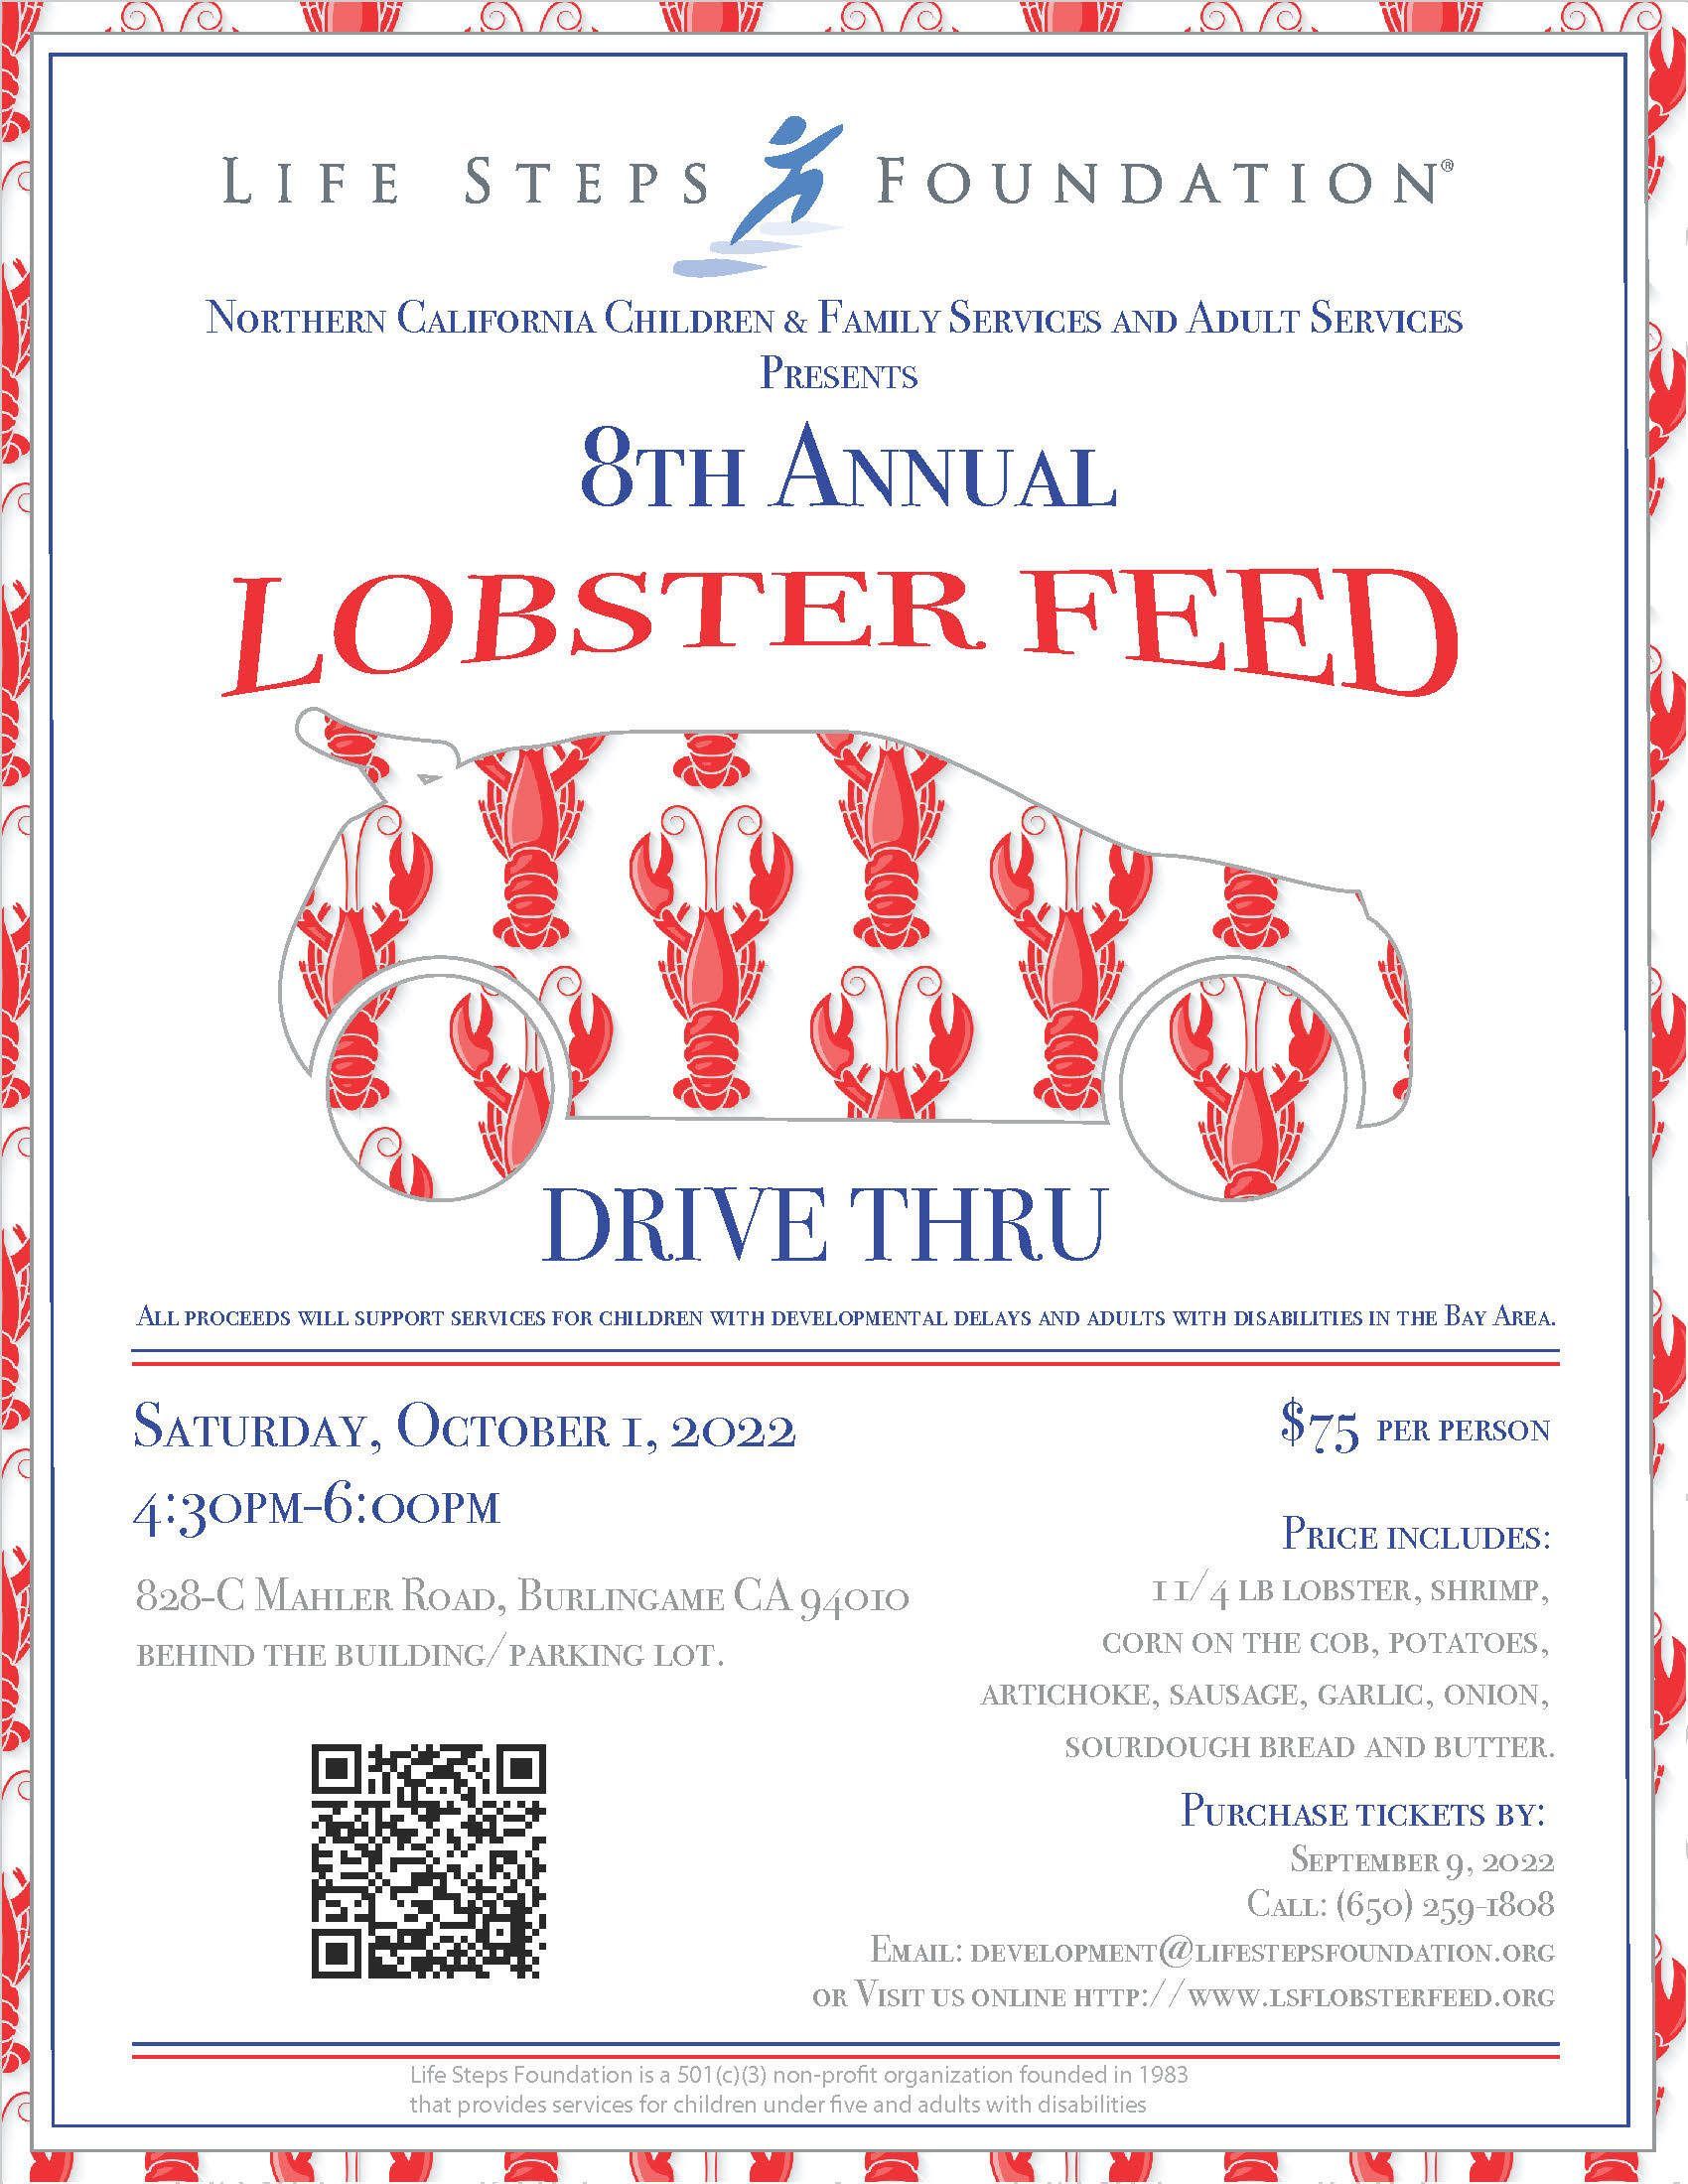 8th Annual Lobster Feed Drive Thru Happening Saturday October 1st